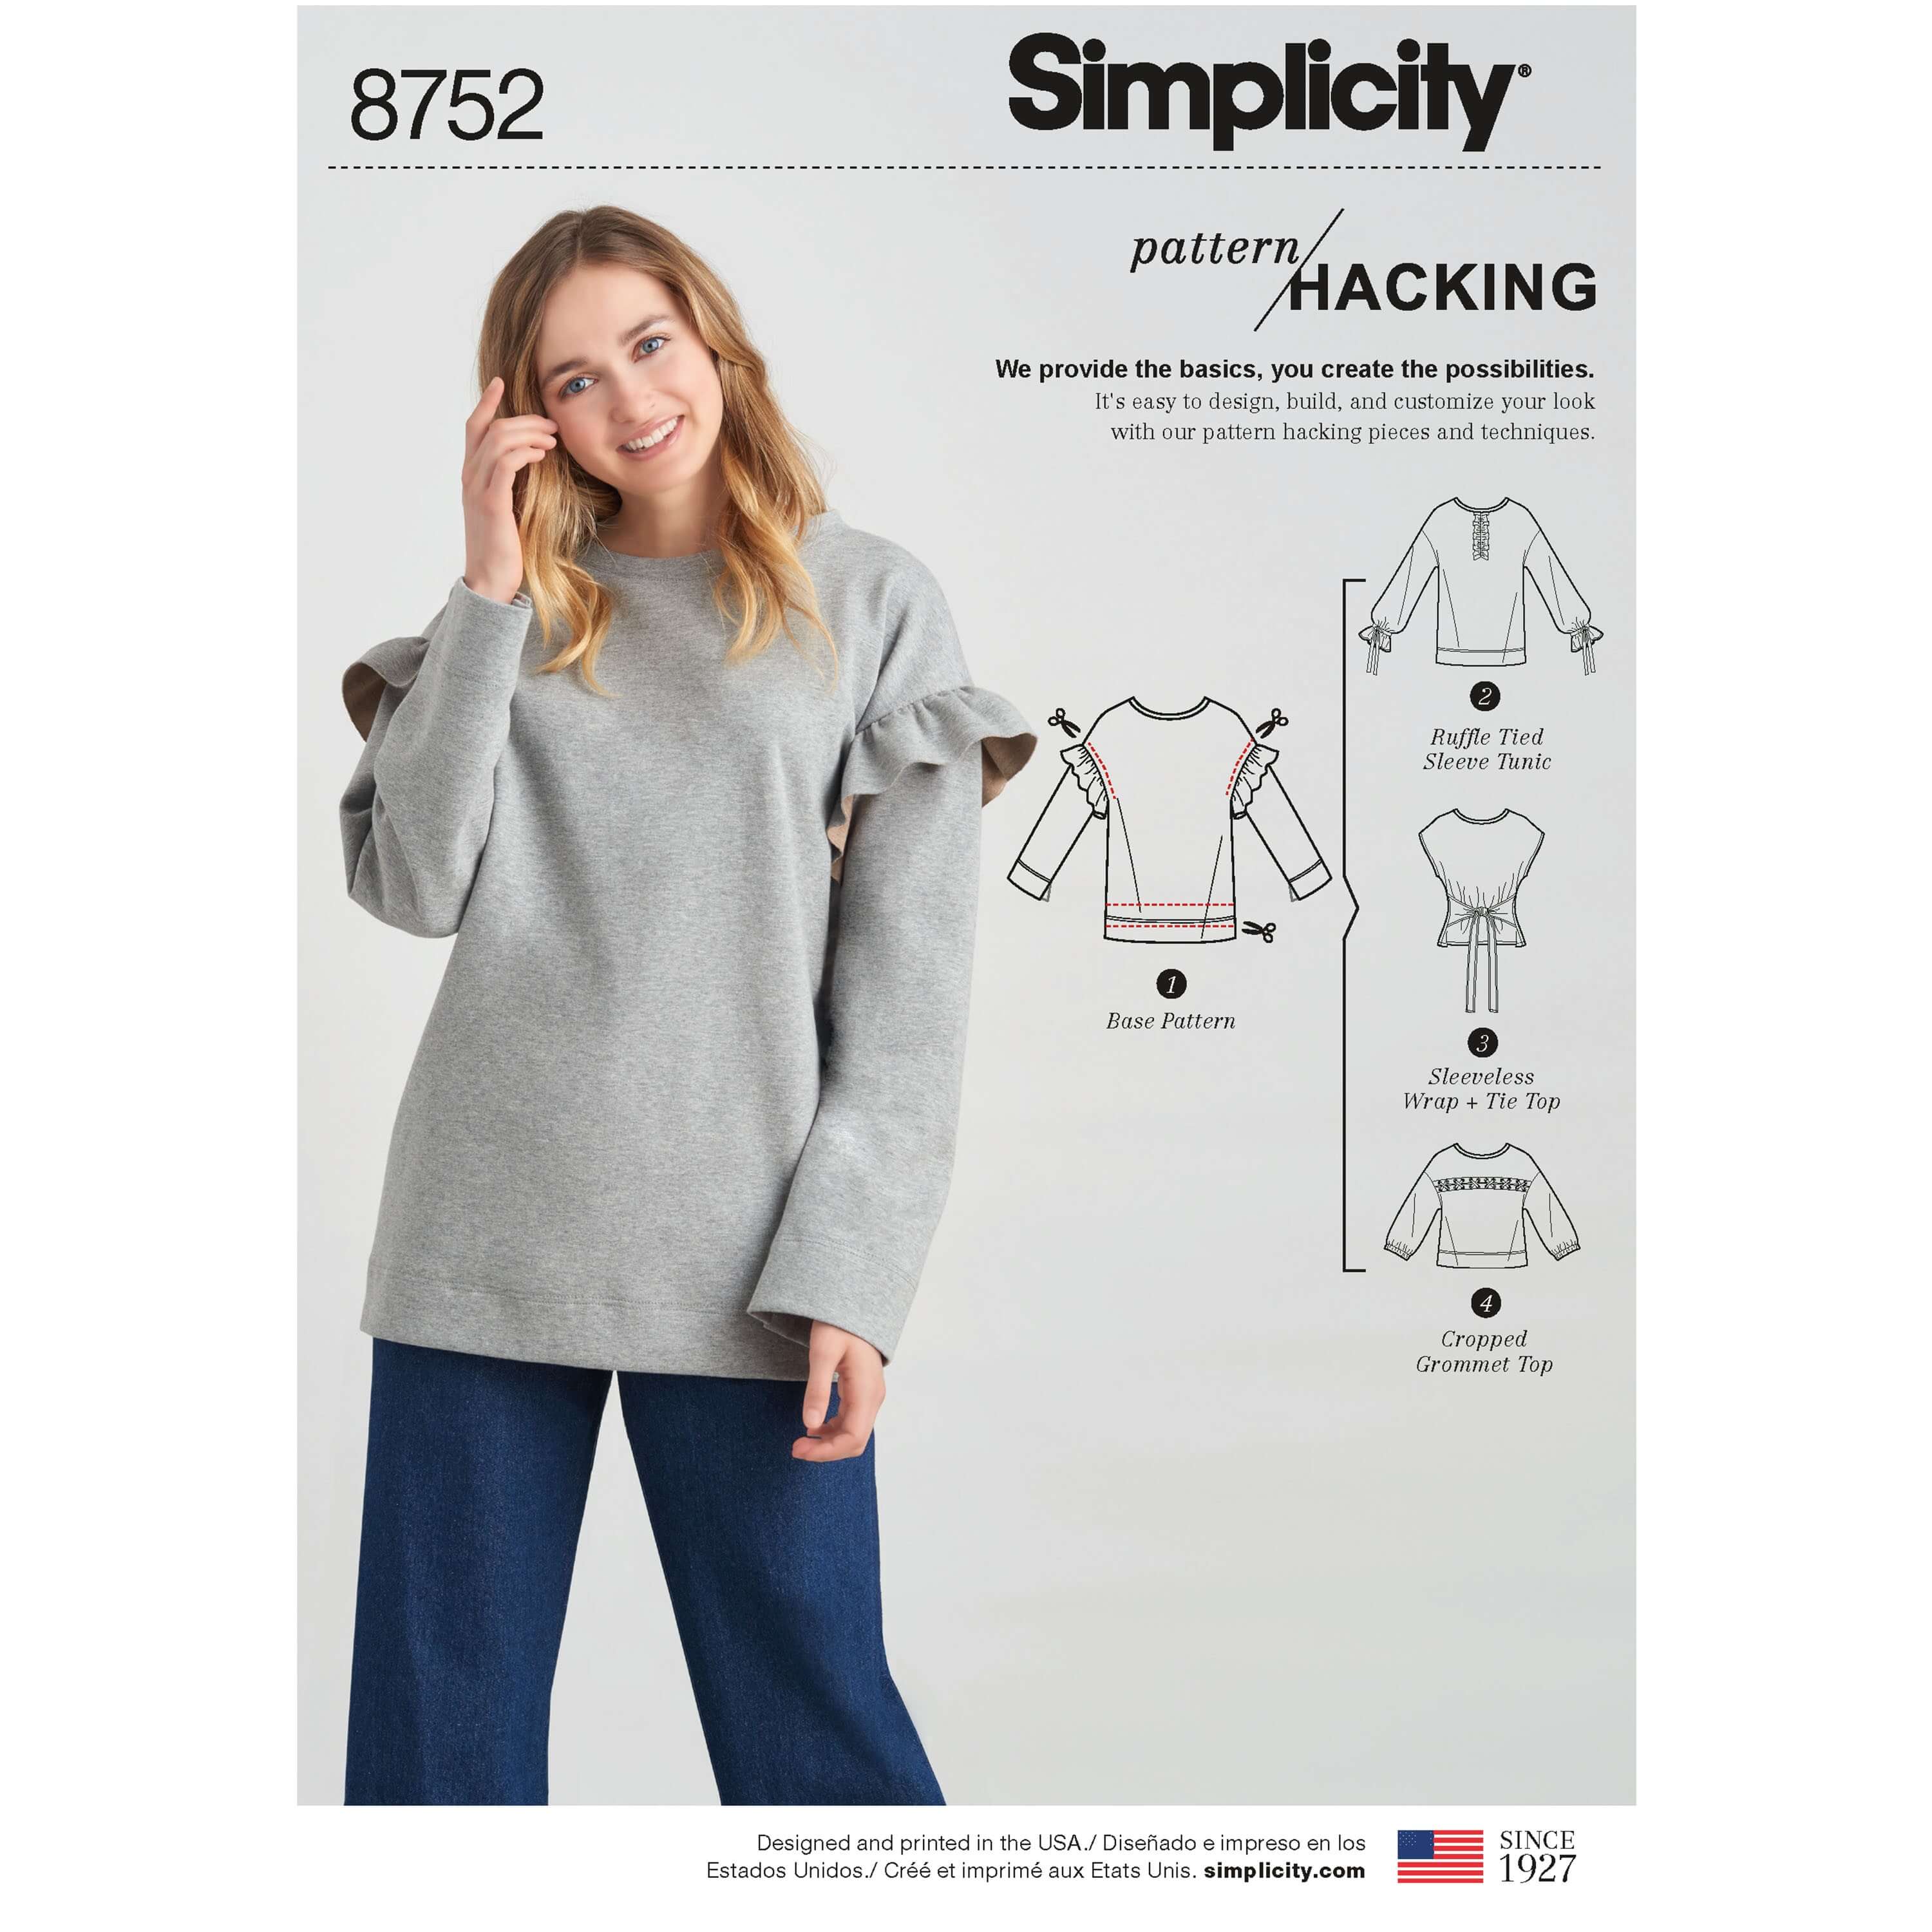 Simplicity Pattern 8752 Misses Knit Tops with Pattern Hacking Sewing Pattern